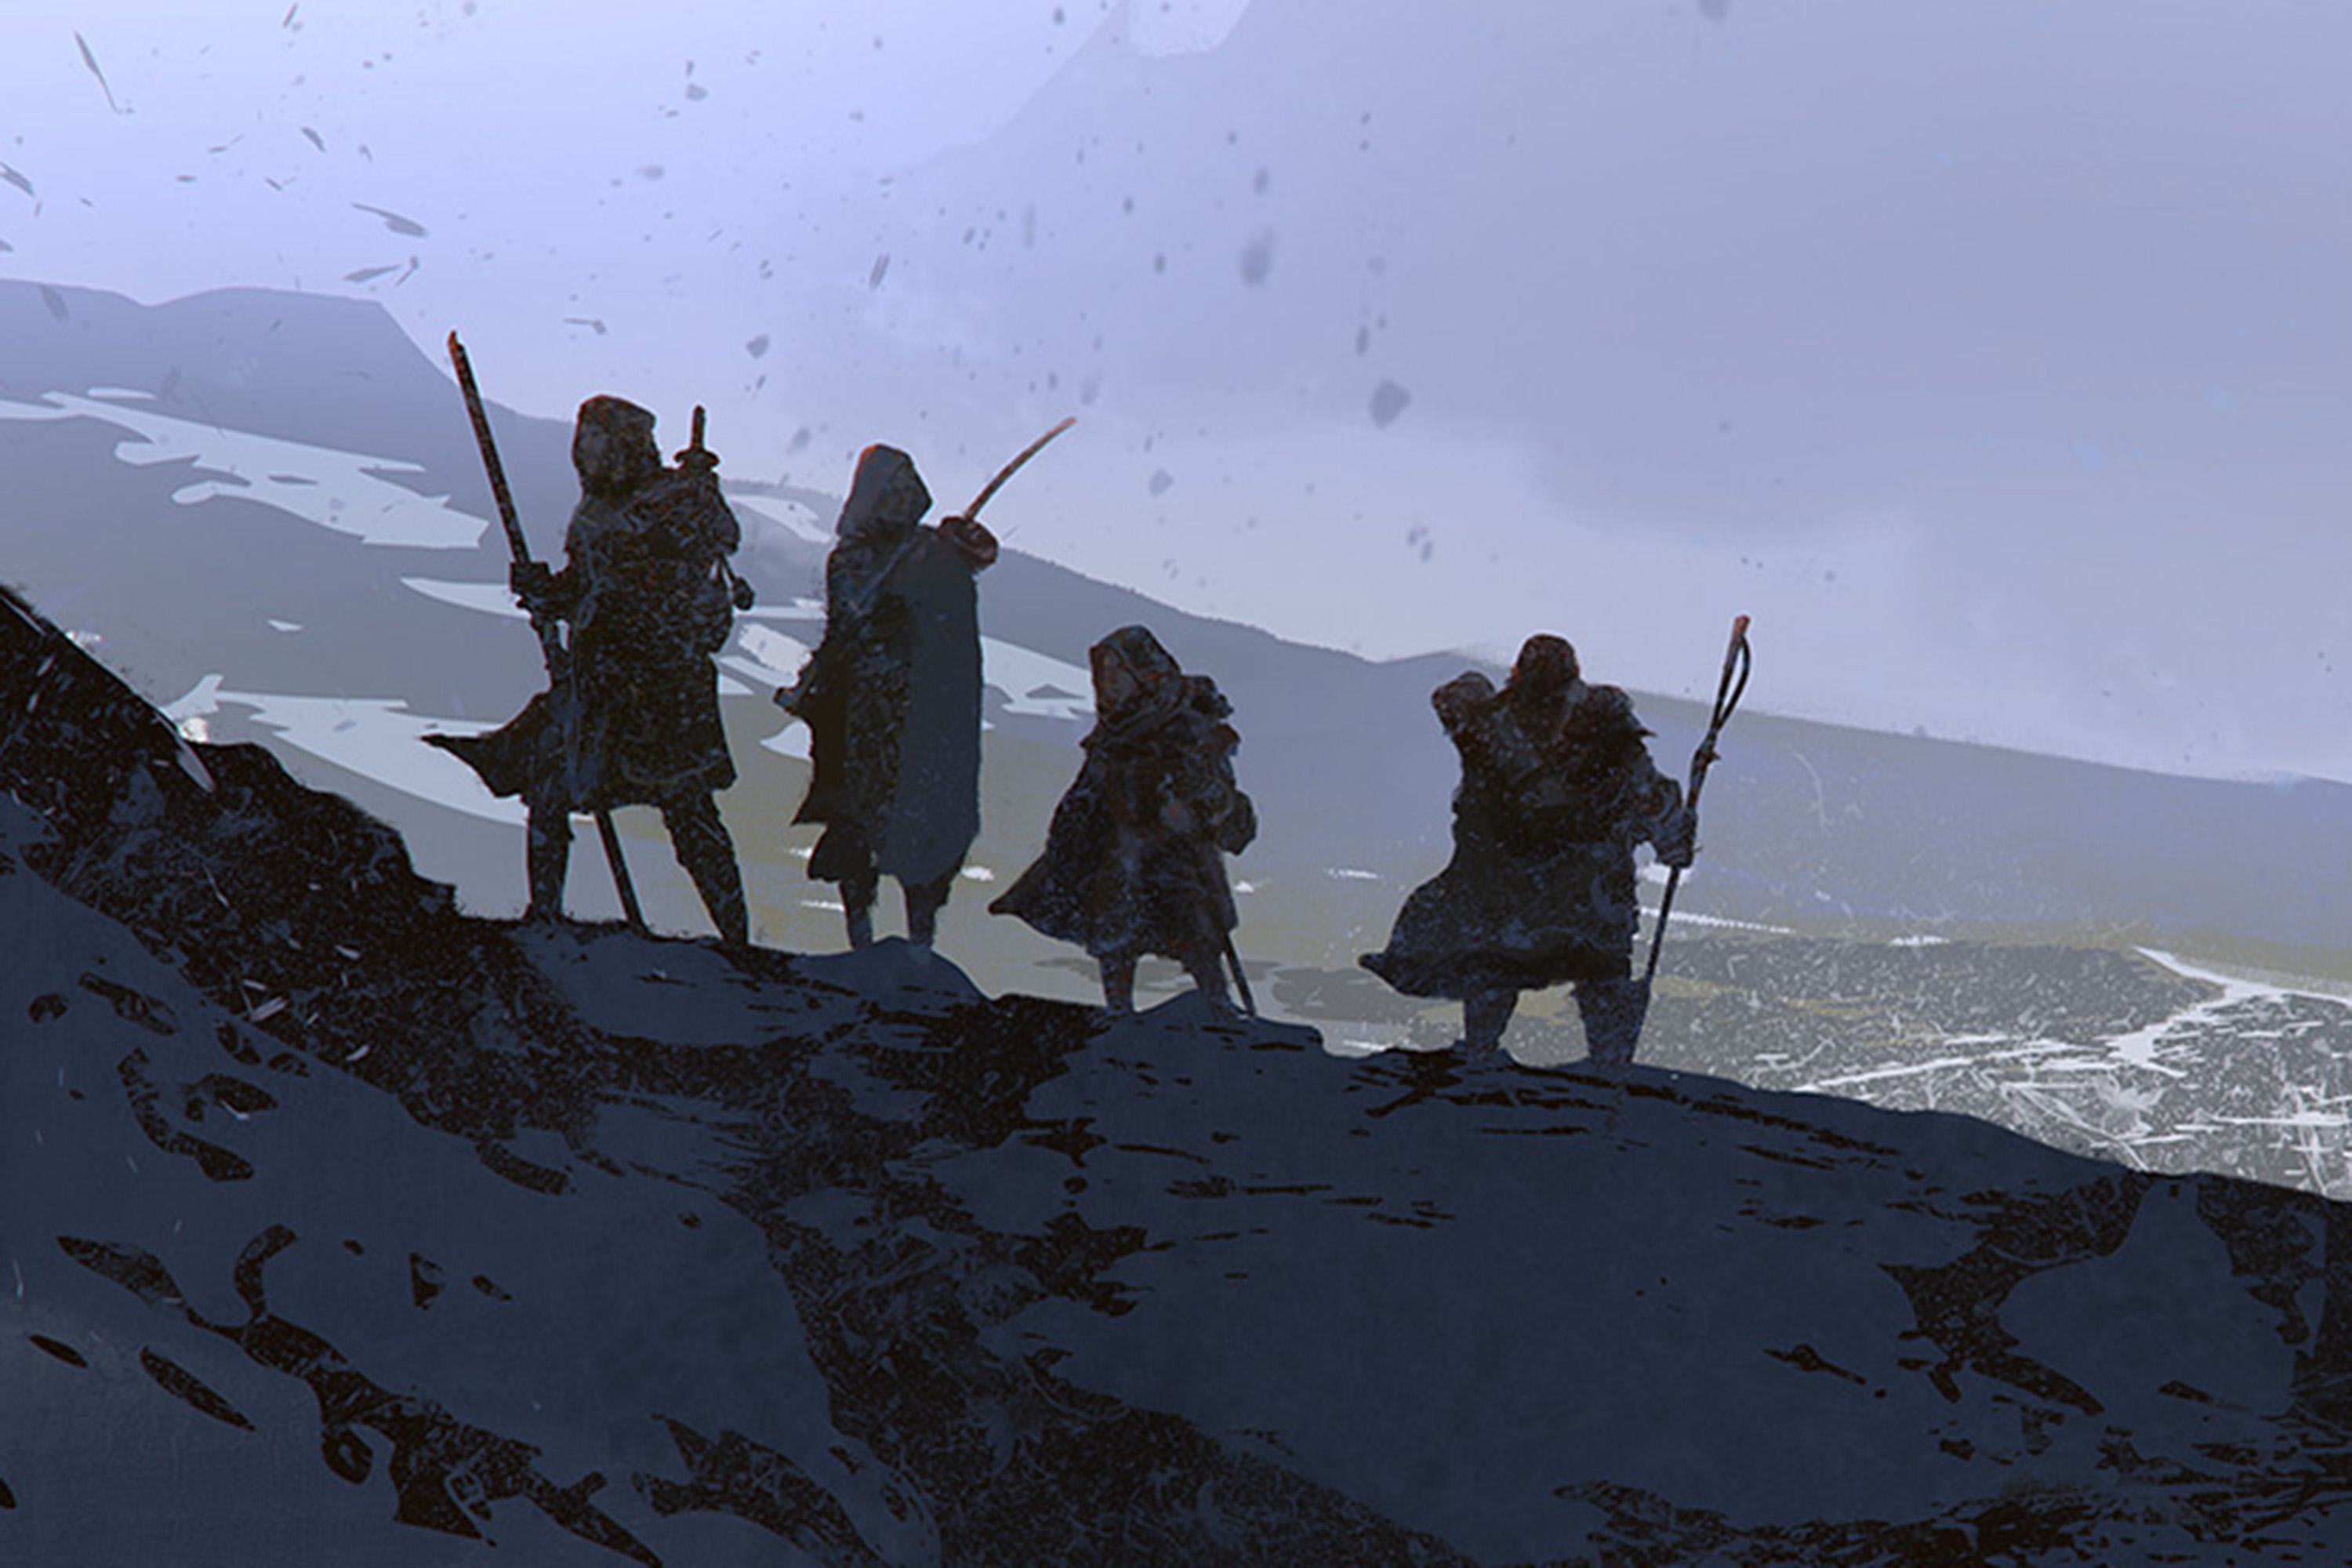 The Fellowship walks across snowy mountains in an impressionistic piece of artwork from The One Ring